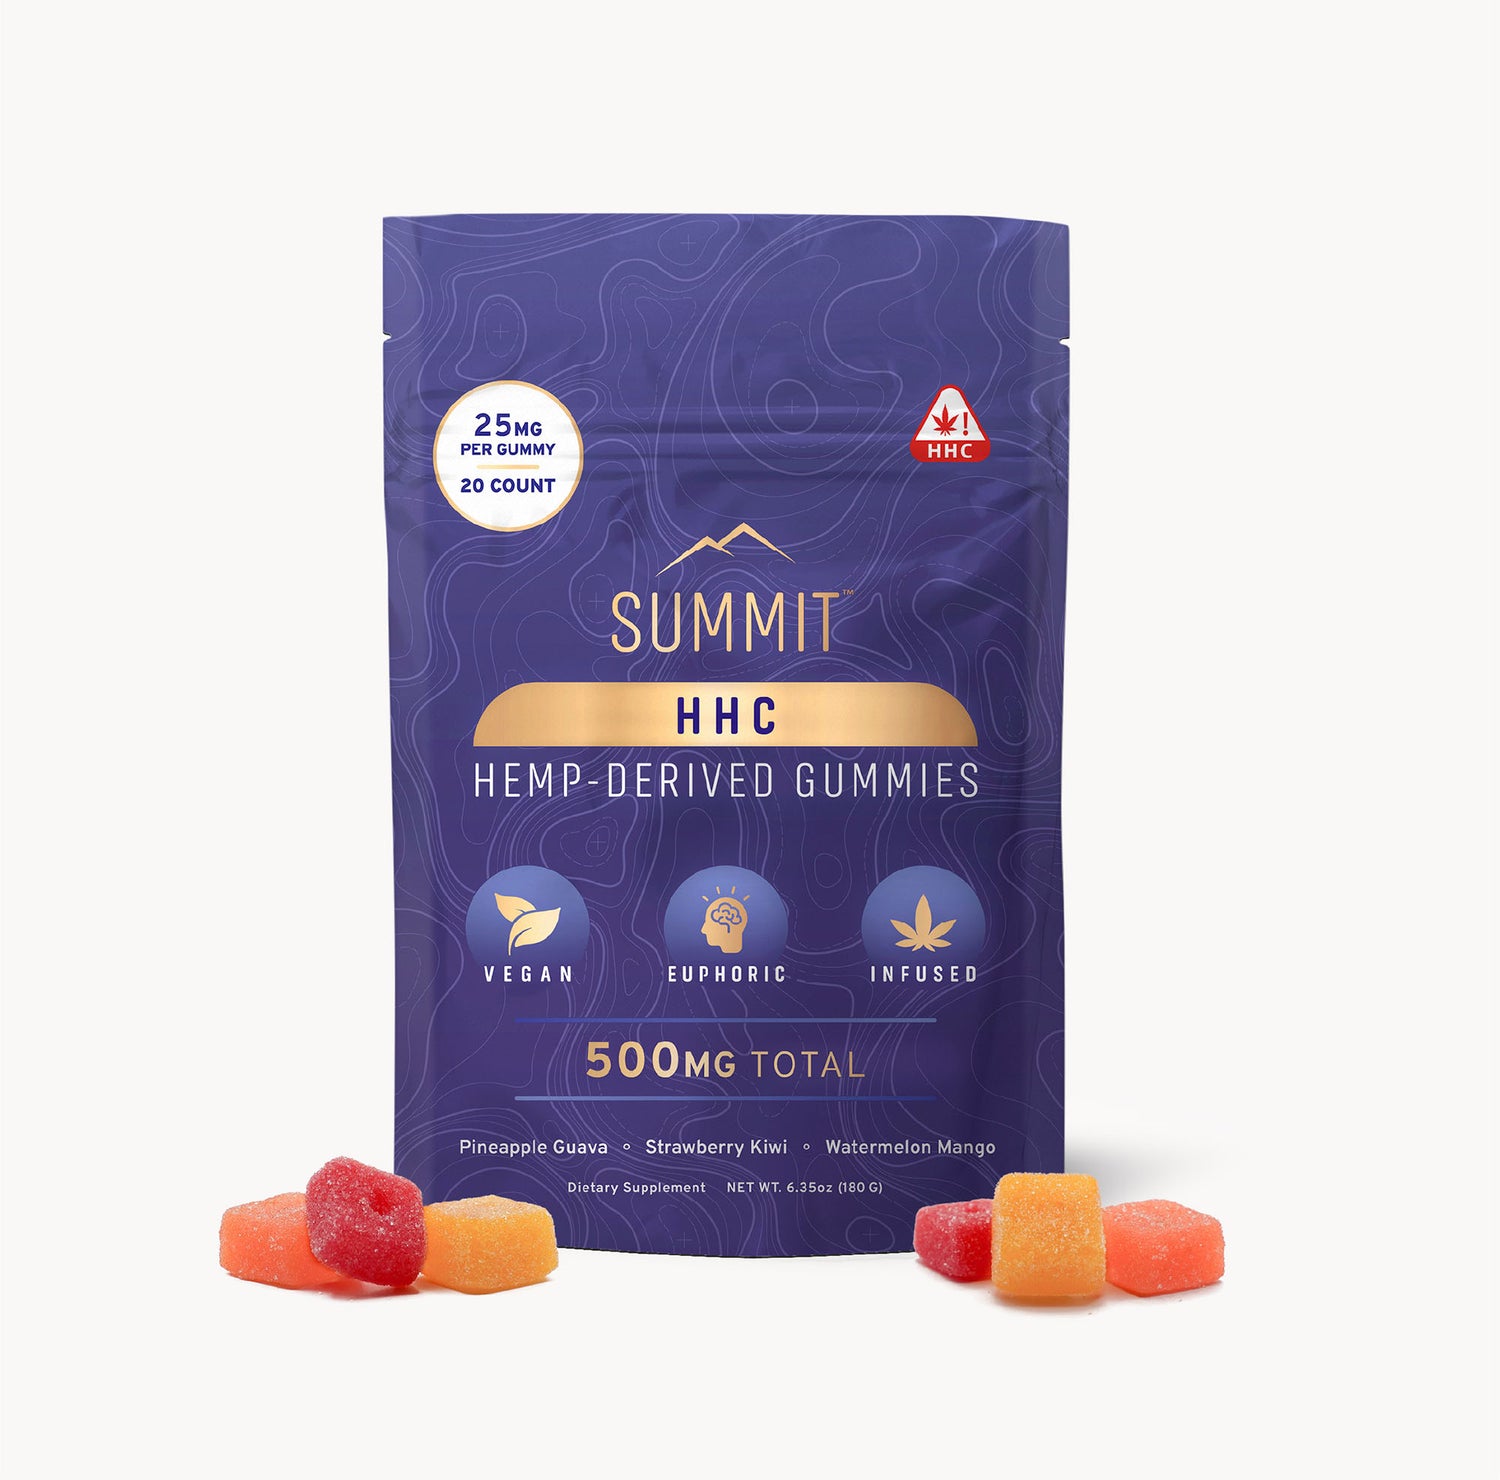 Subscription of 25mg HHC Gummies - 20ct